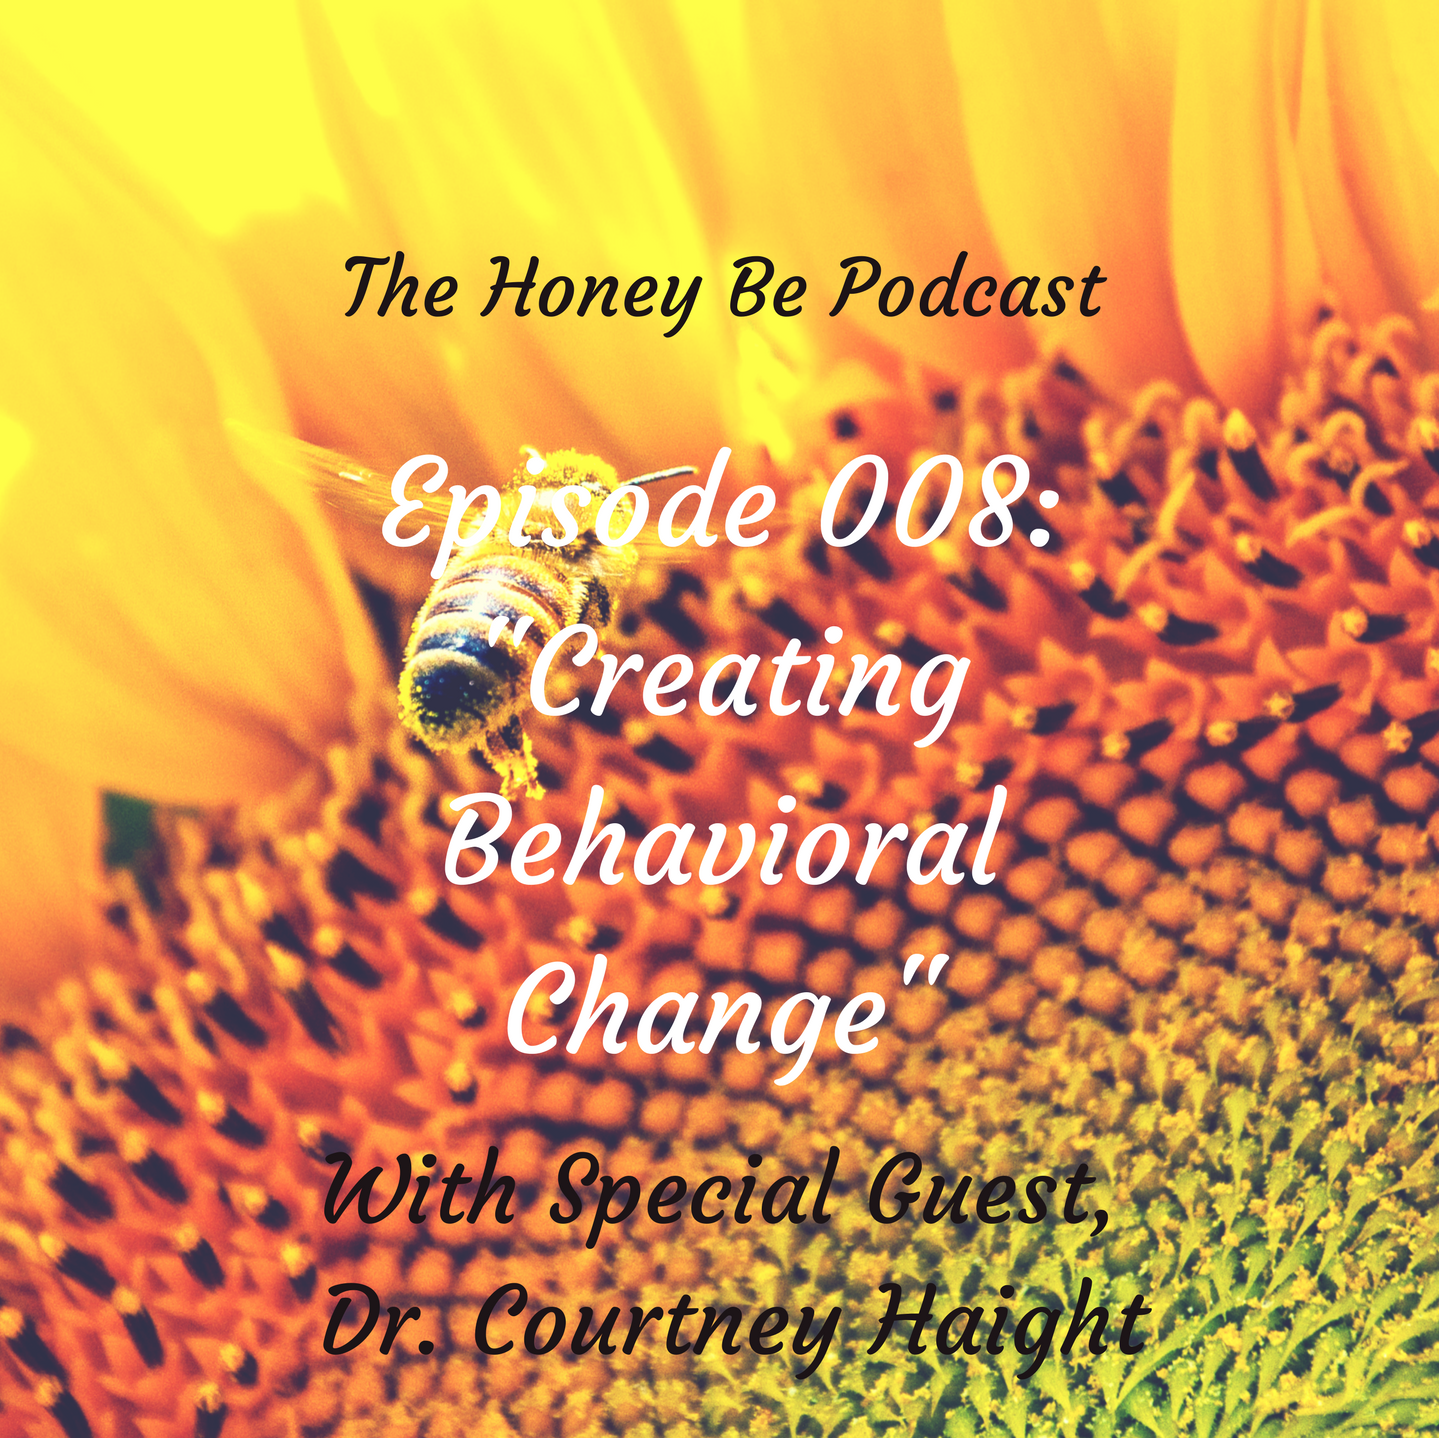 The Honey Be Podcast – Episode 008: “Creating Behavioral Change”